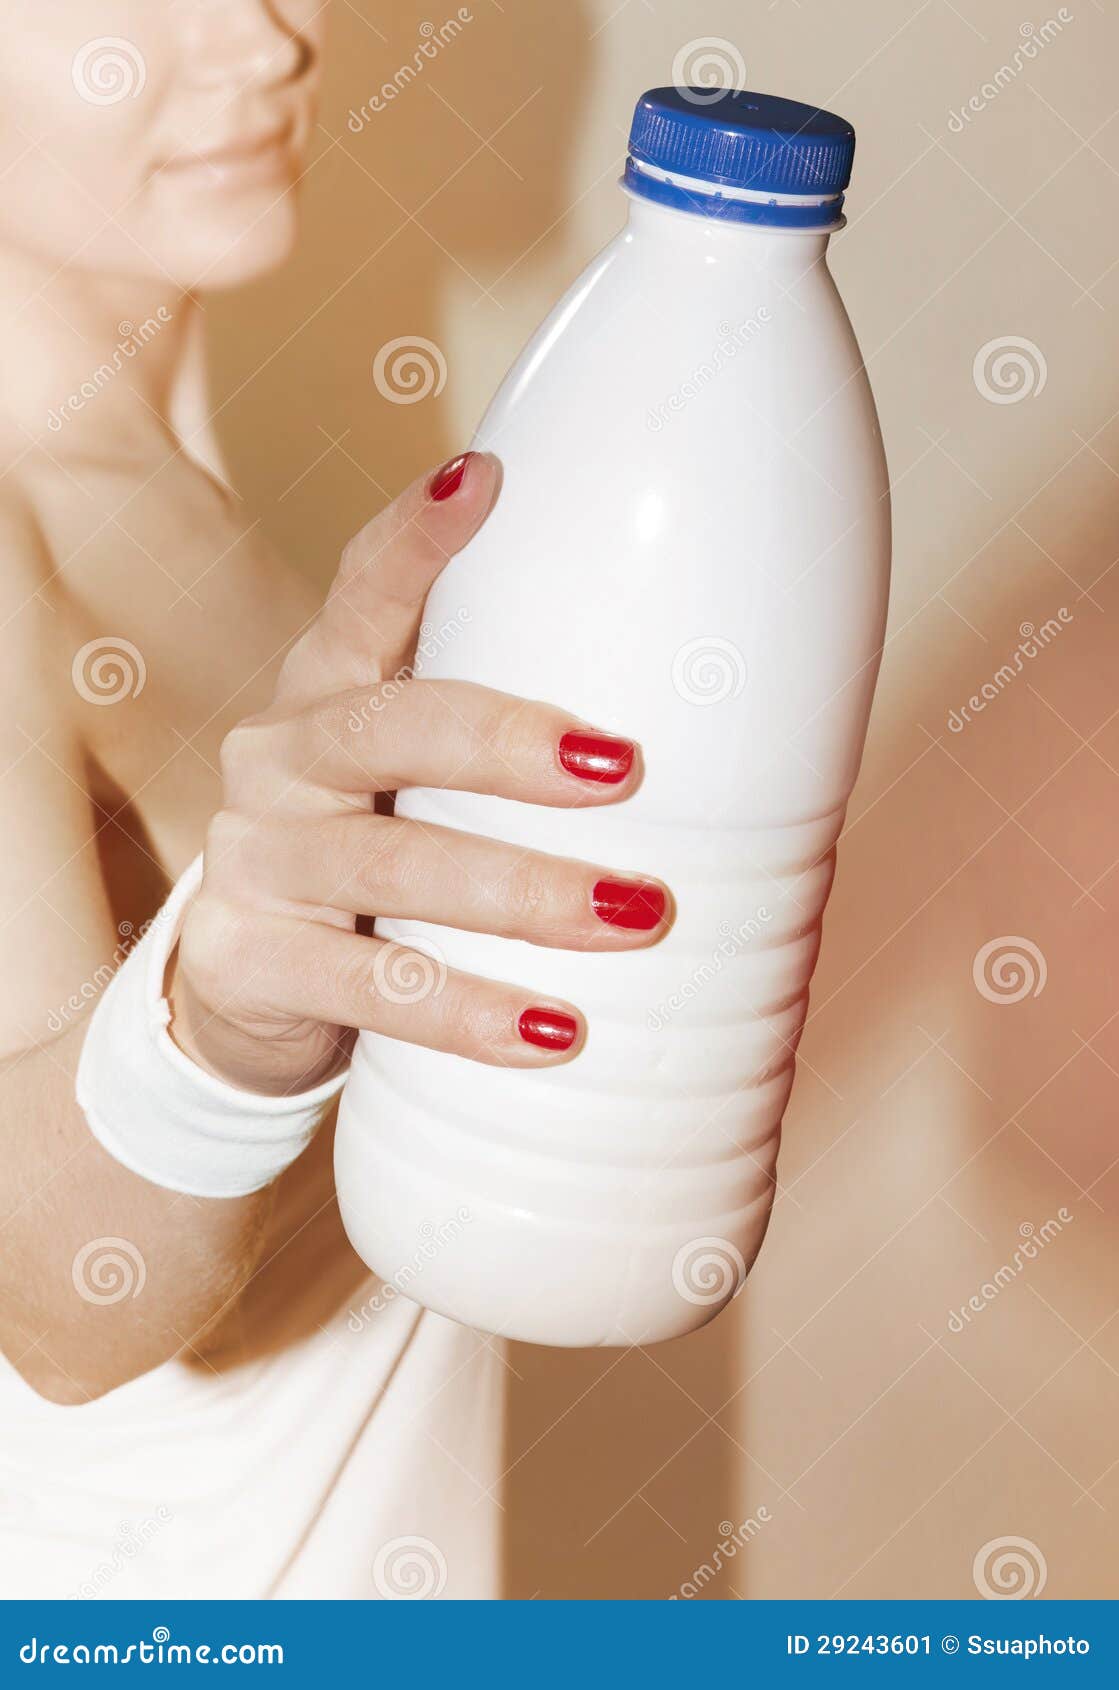 woman suggests to take bottle